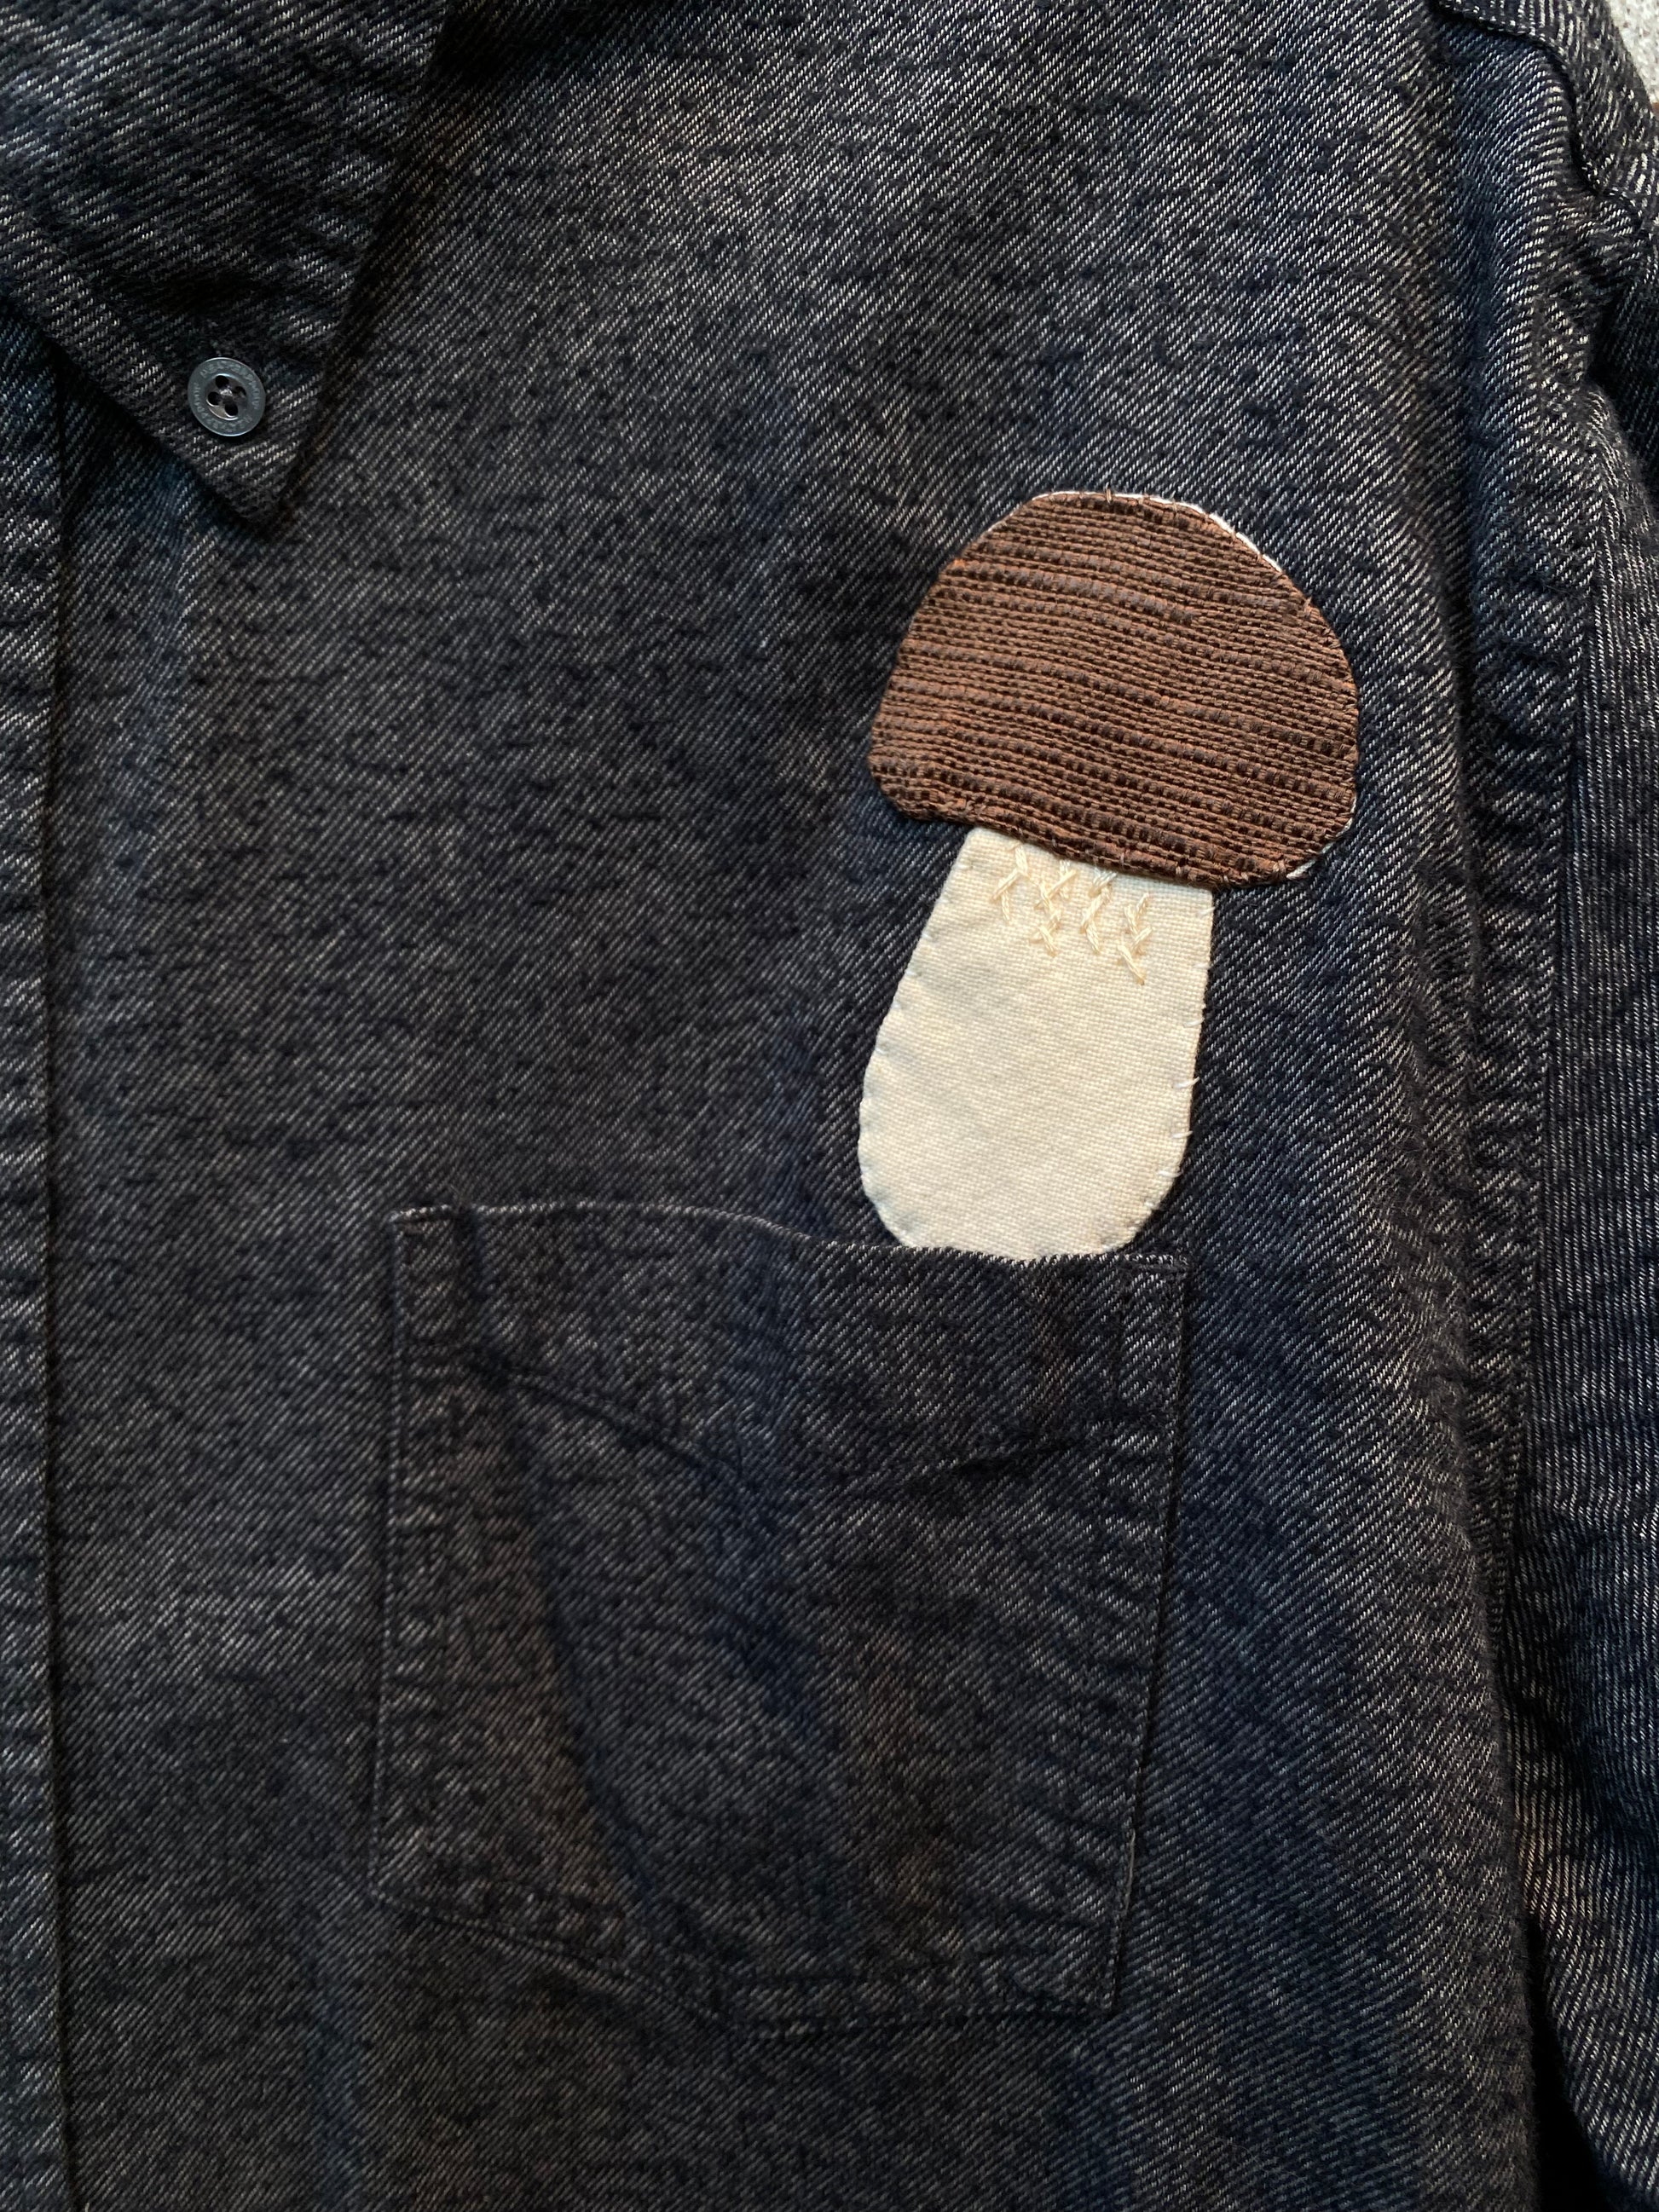 flannel shirt with hand sewn boletes